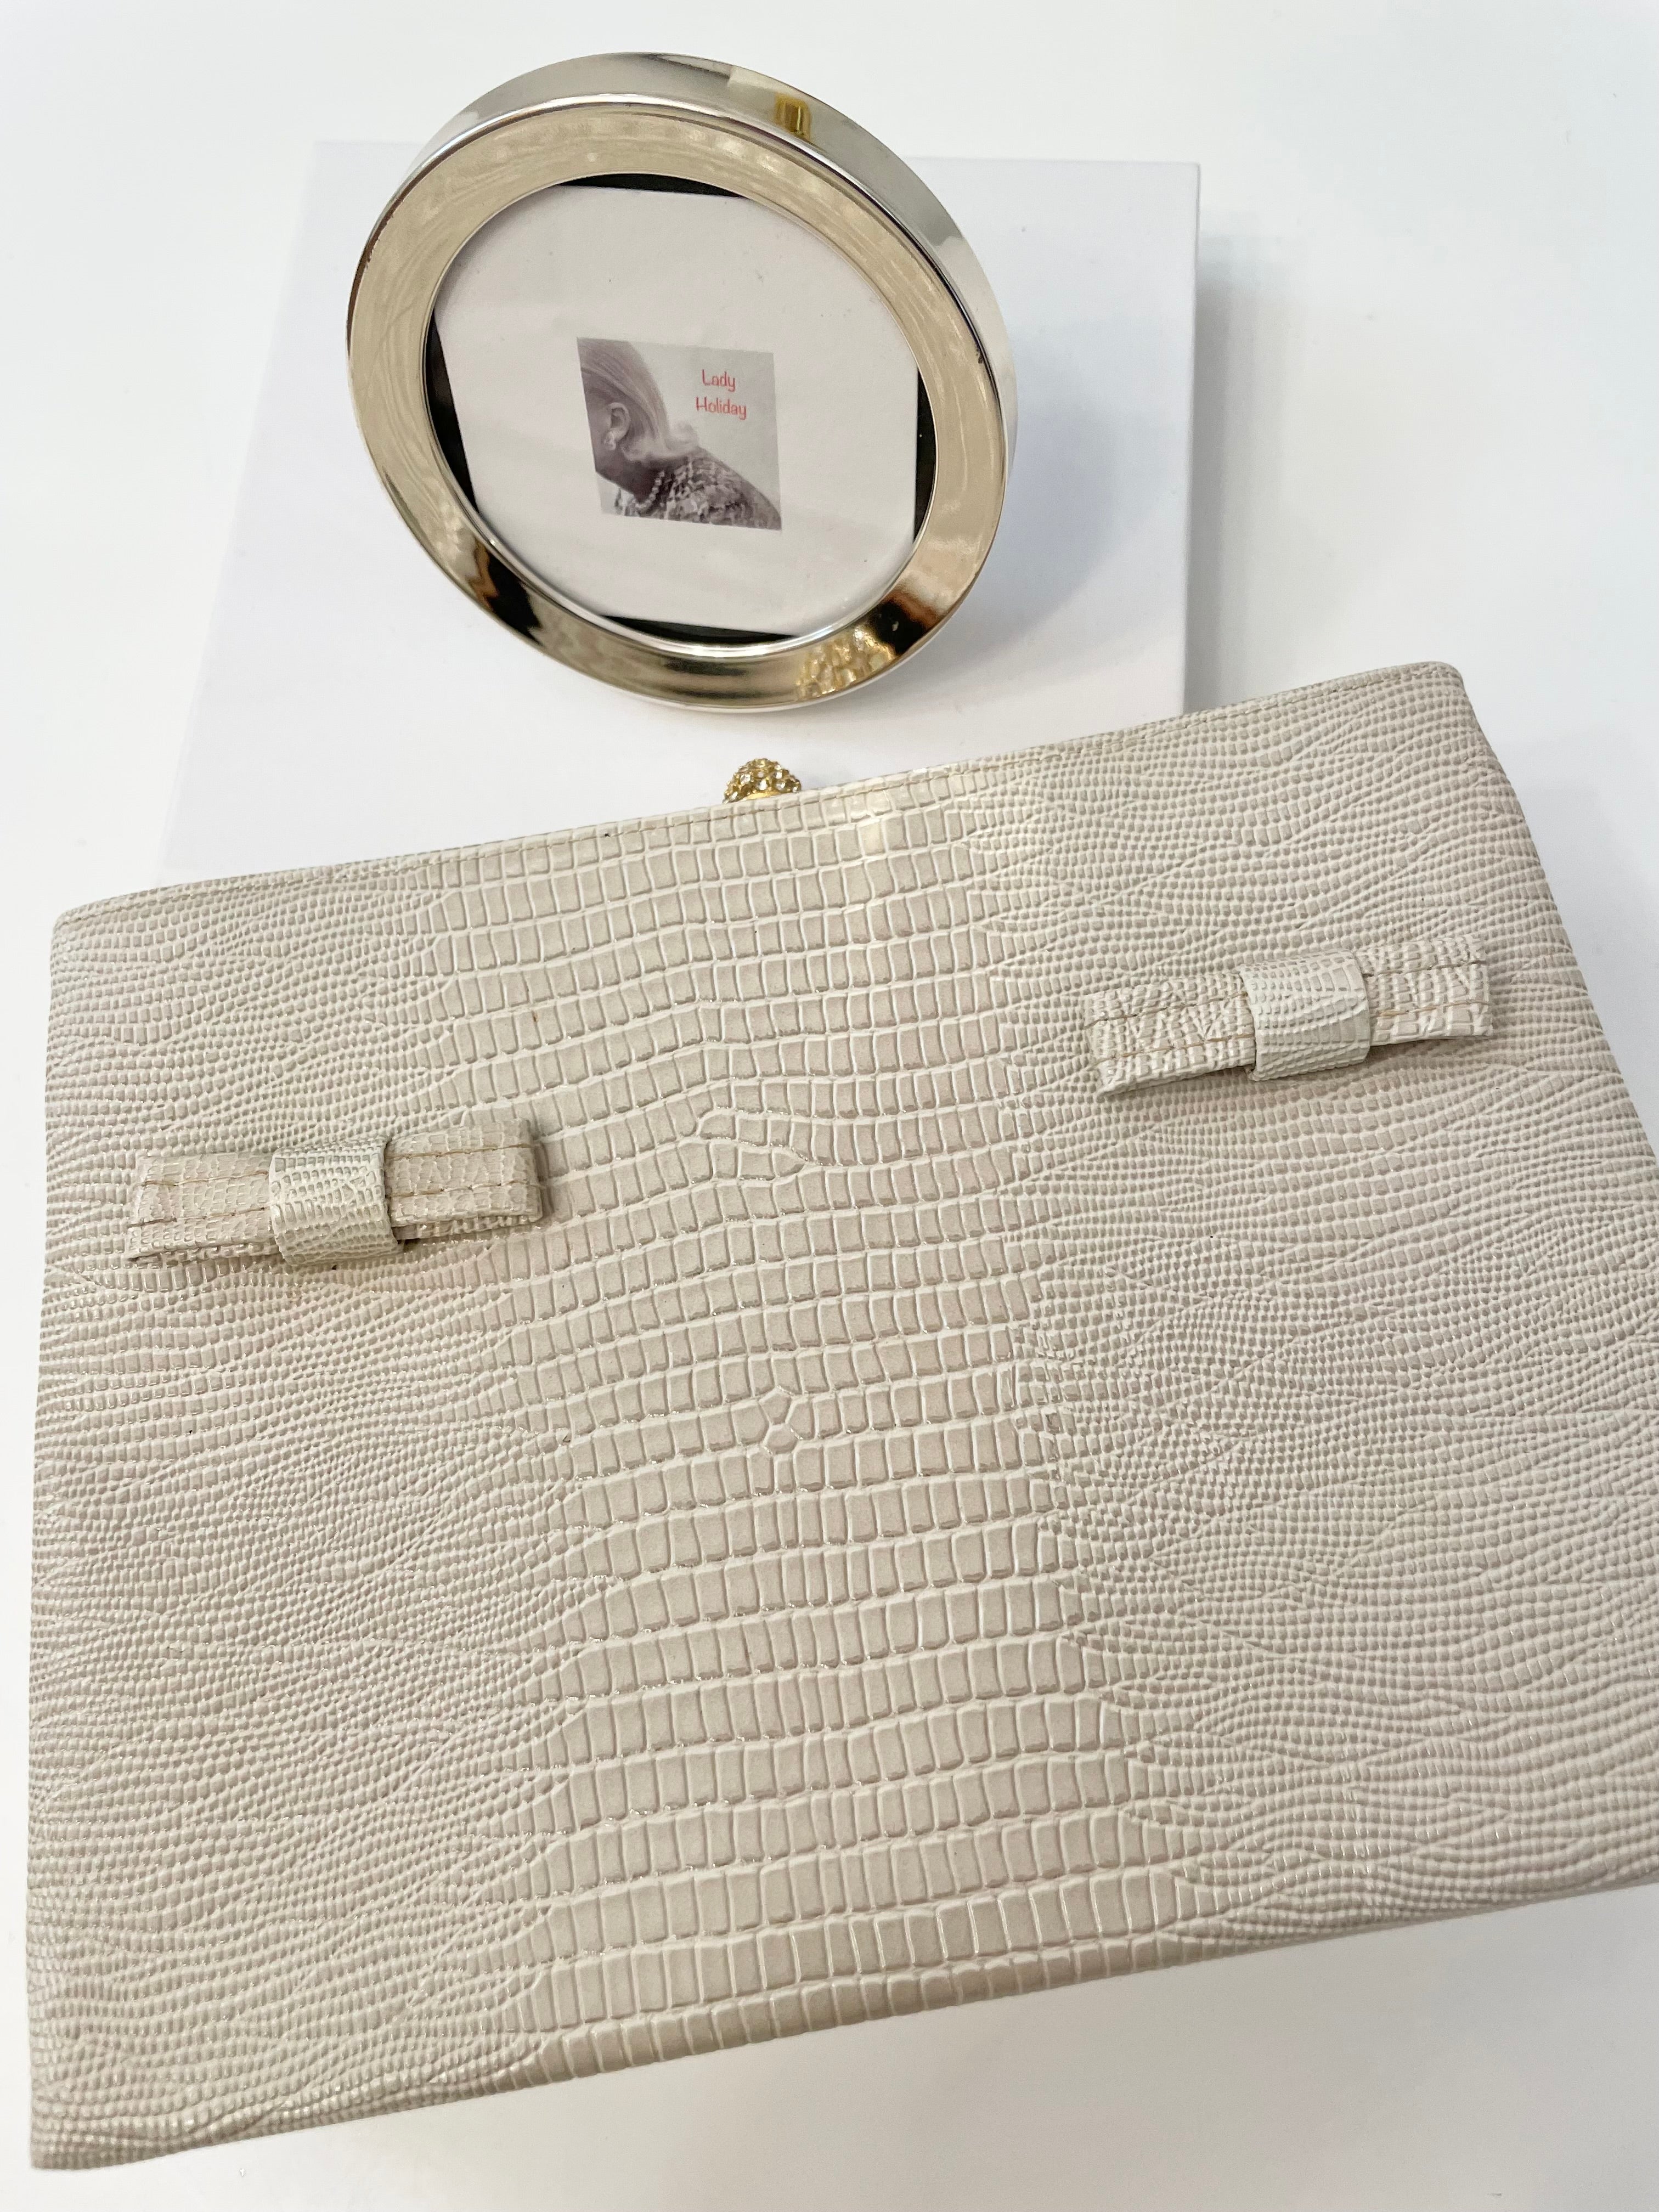 Vintage 1960's classy ivory embossed lizard ladies who lunch bag, with feminine bow details!